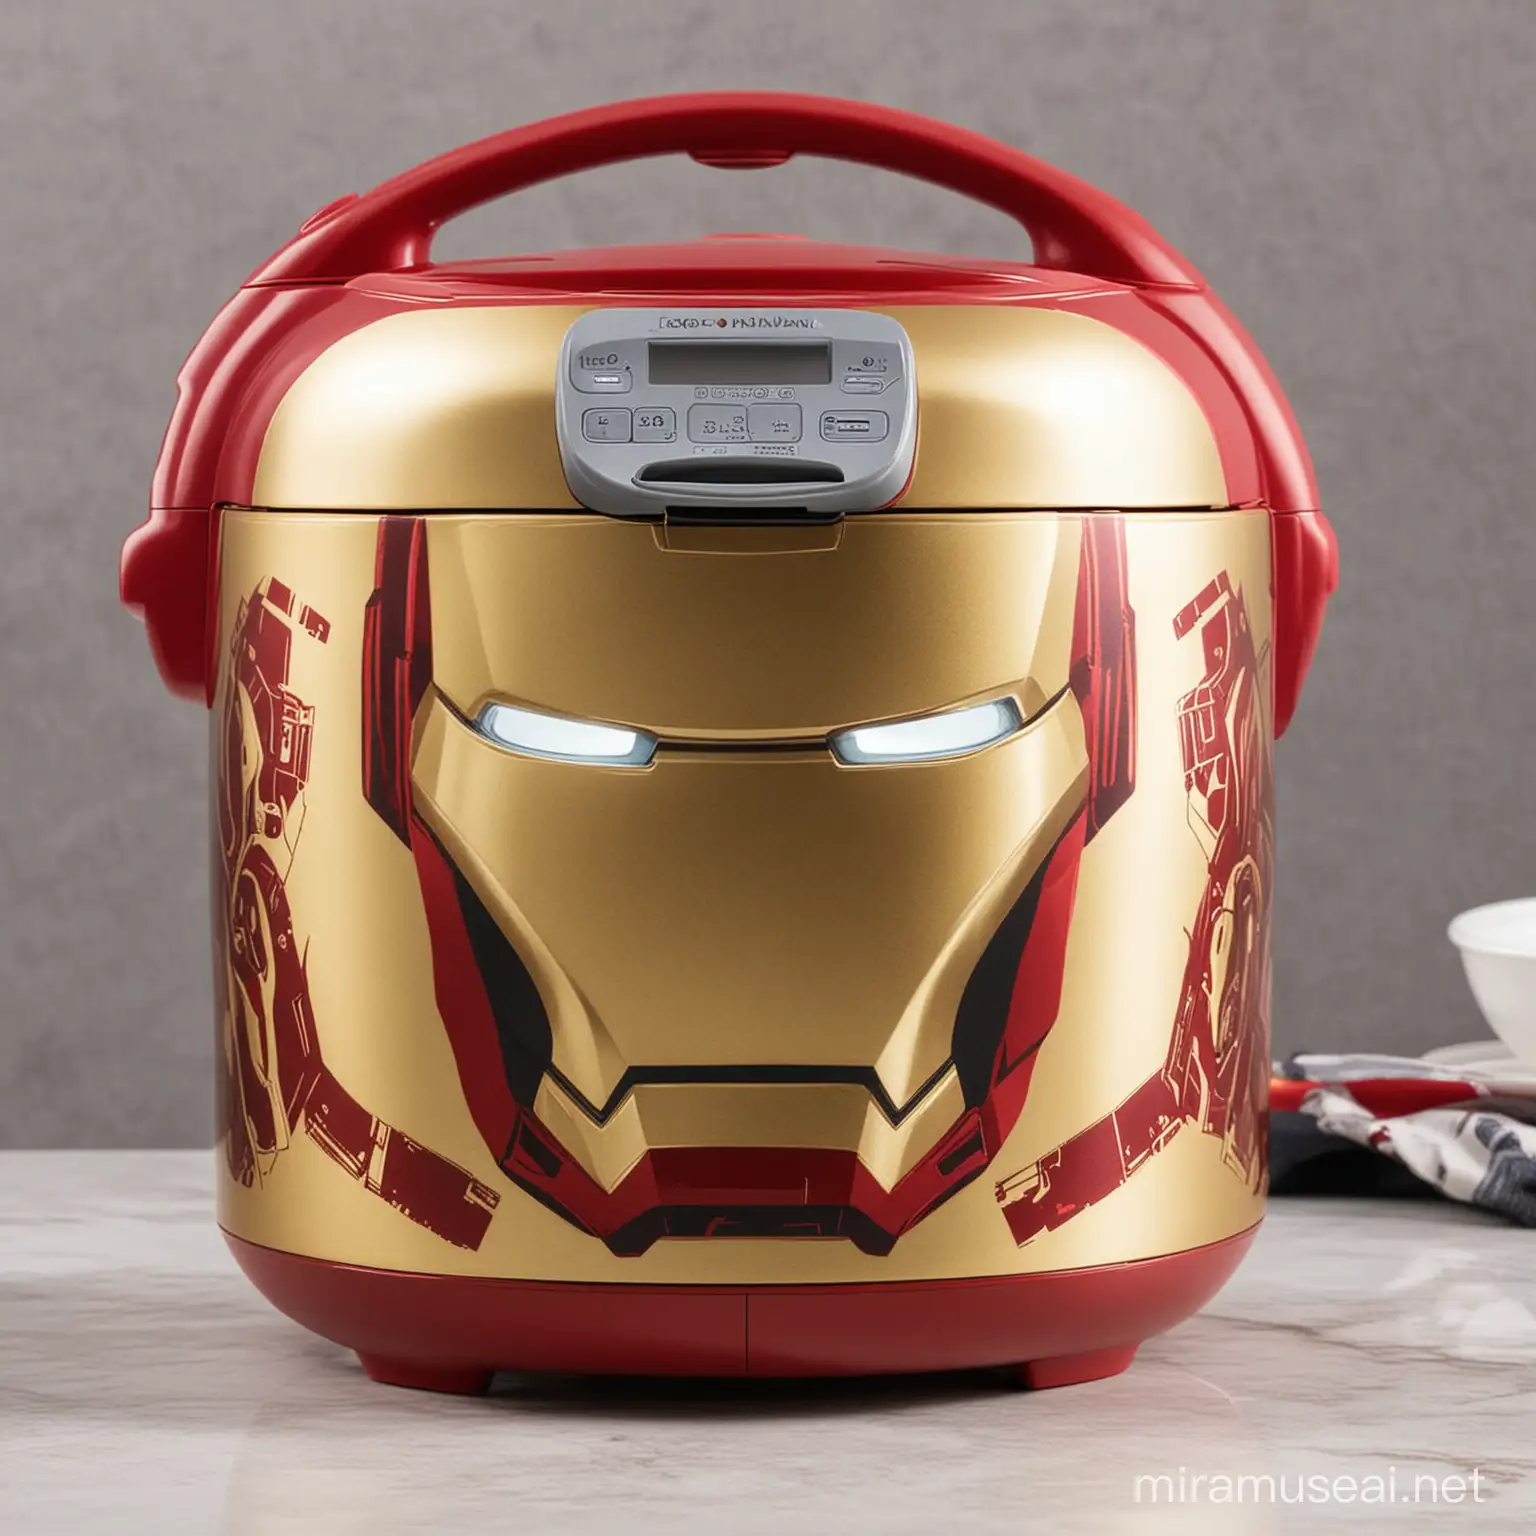 Image of an Iron Man patterned rice cooker